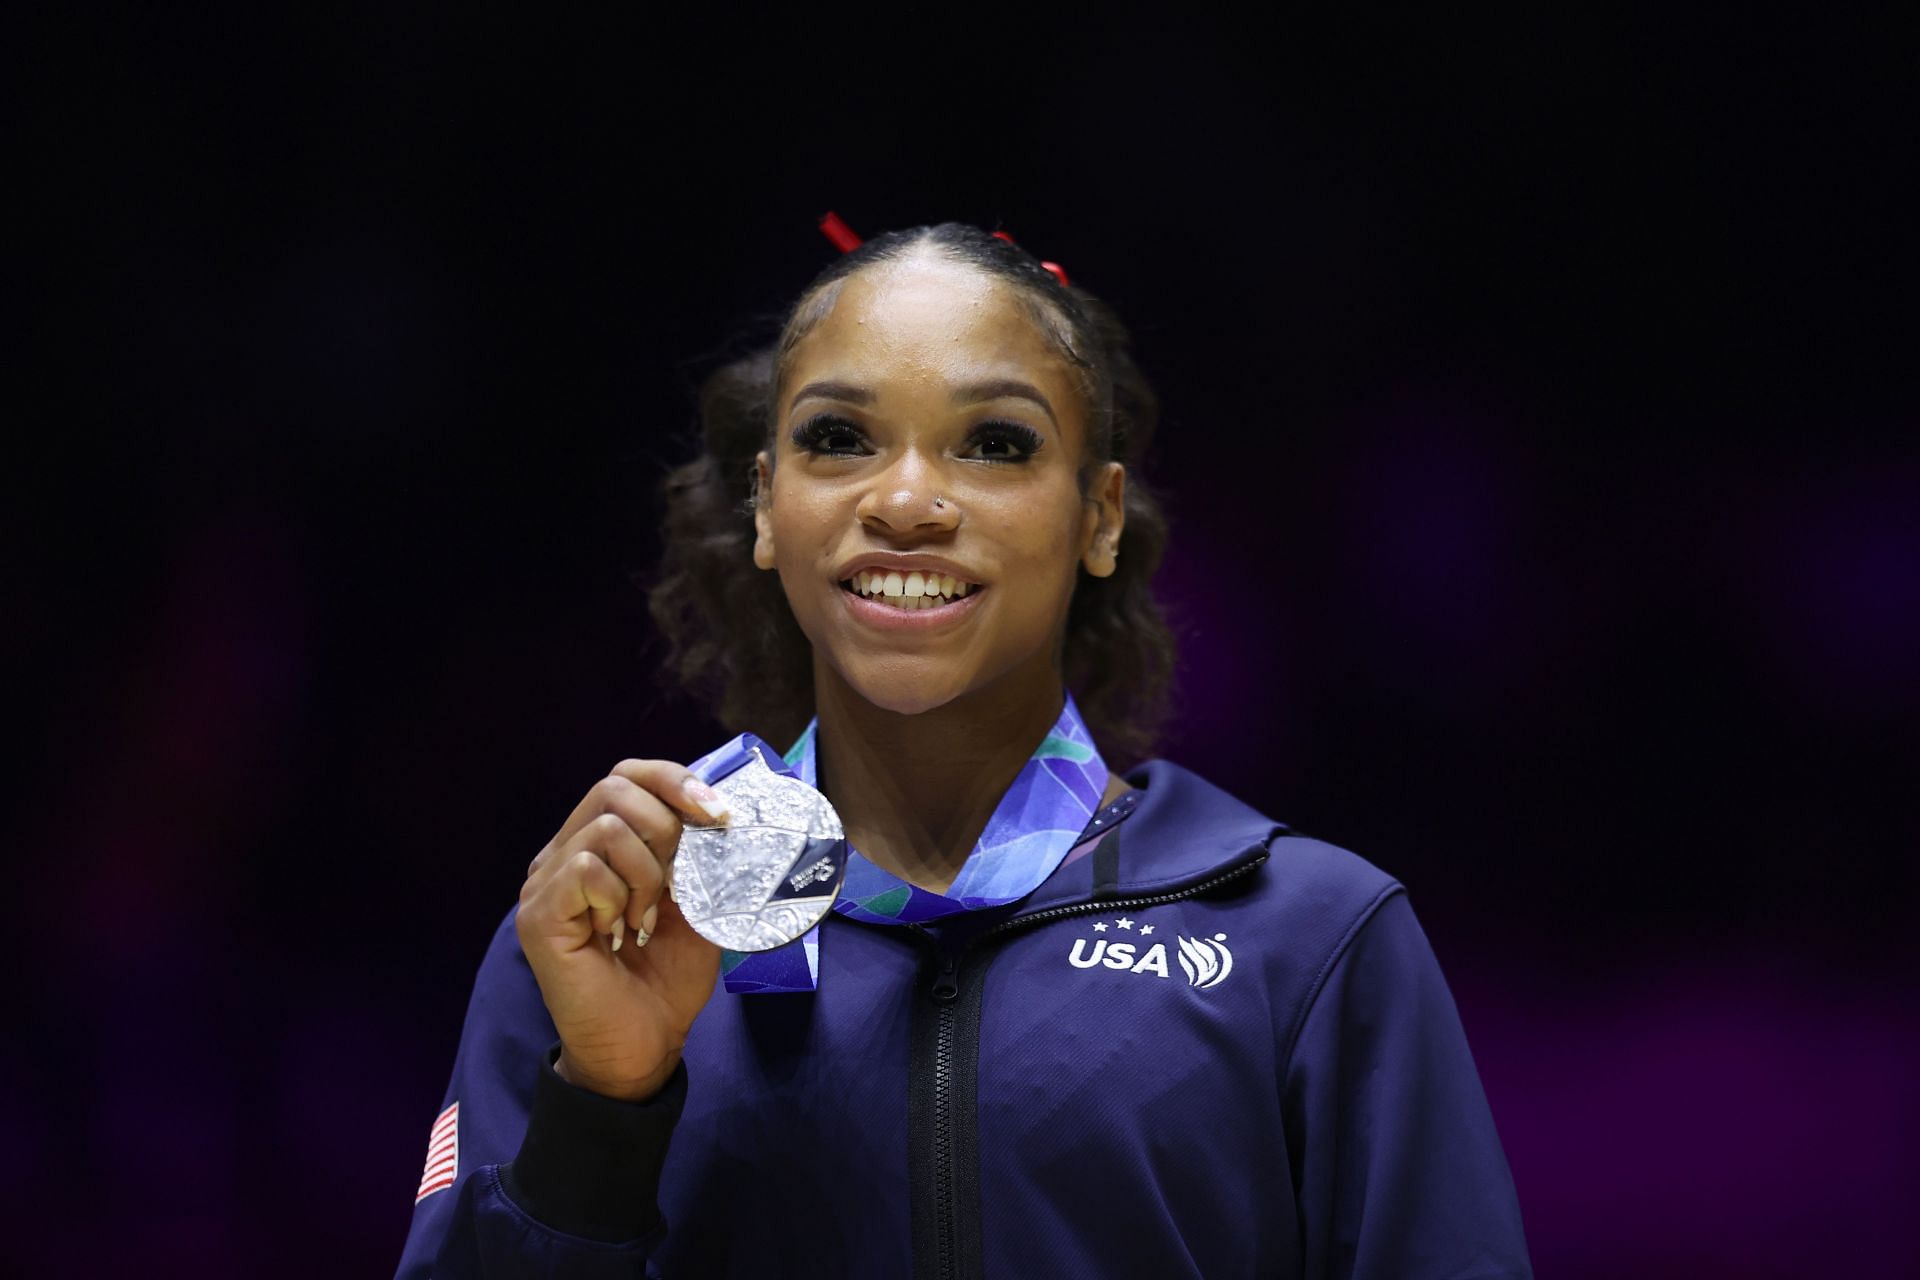 Shilese Jones wins silver at the 2022 Gymnastics World Championships (Photo by Naomi Baker/Getty Images)